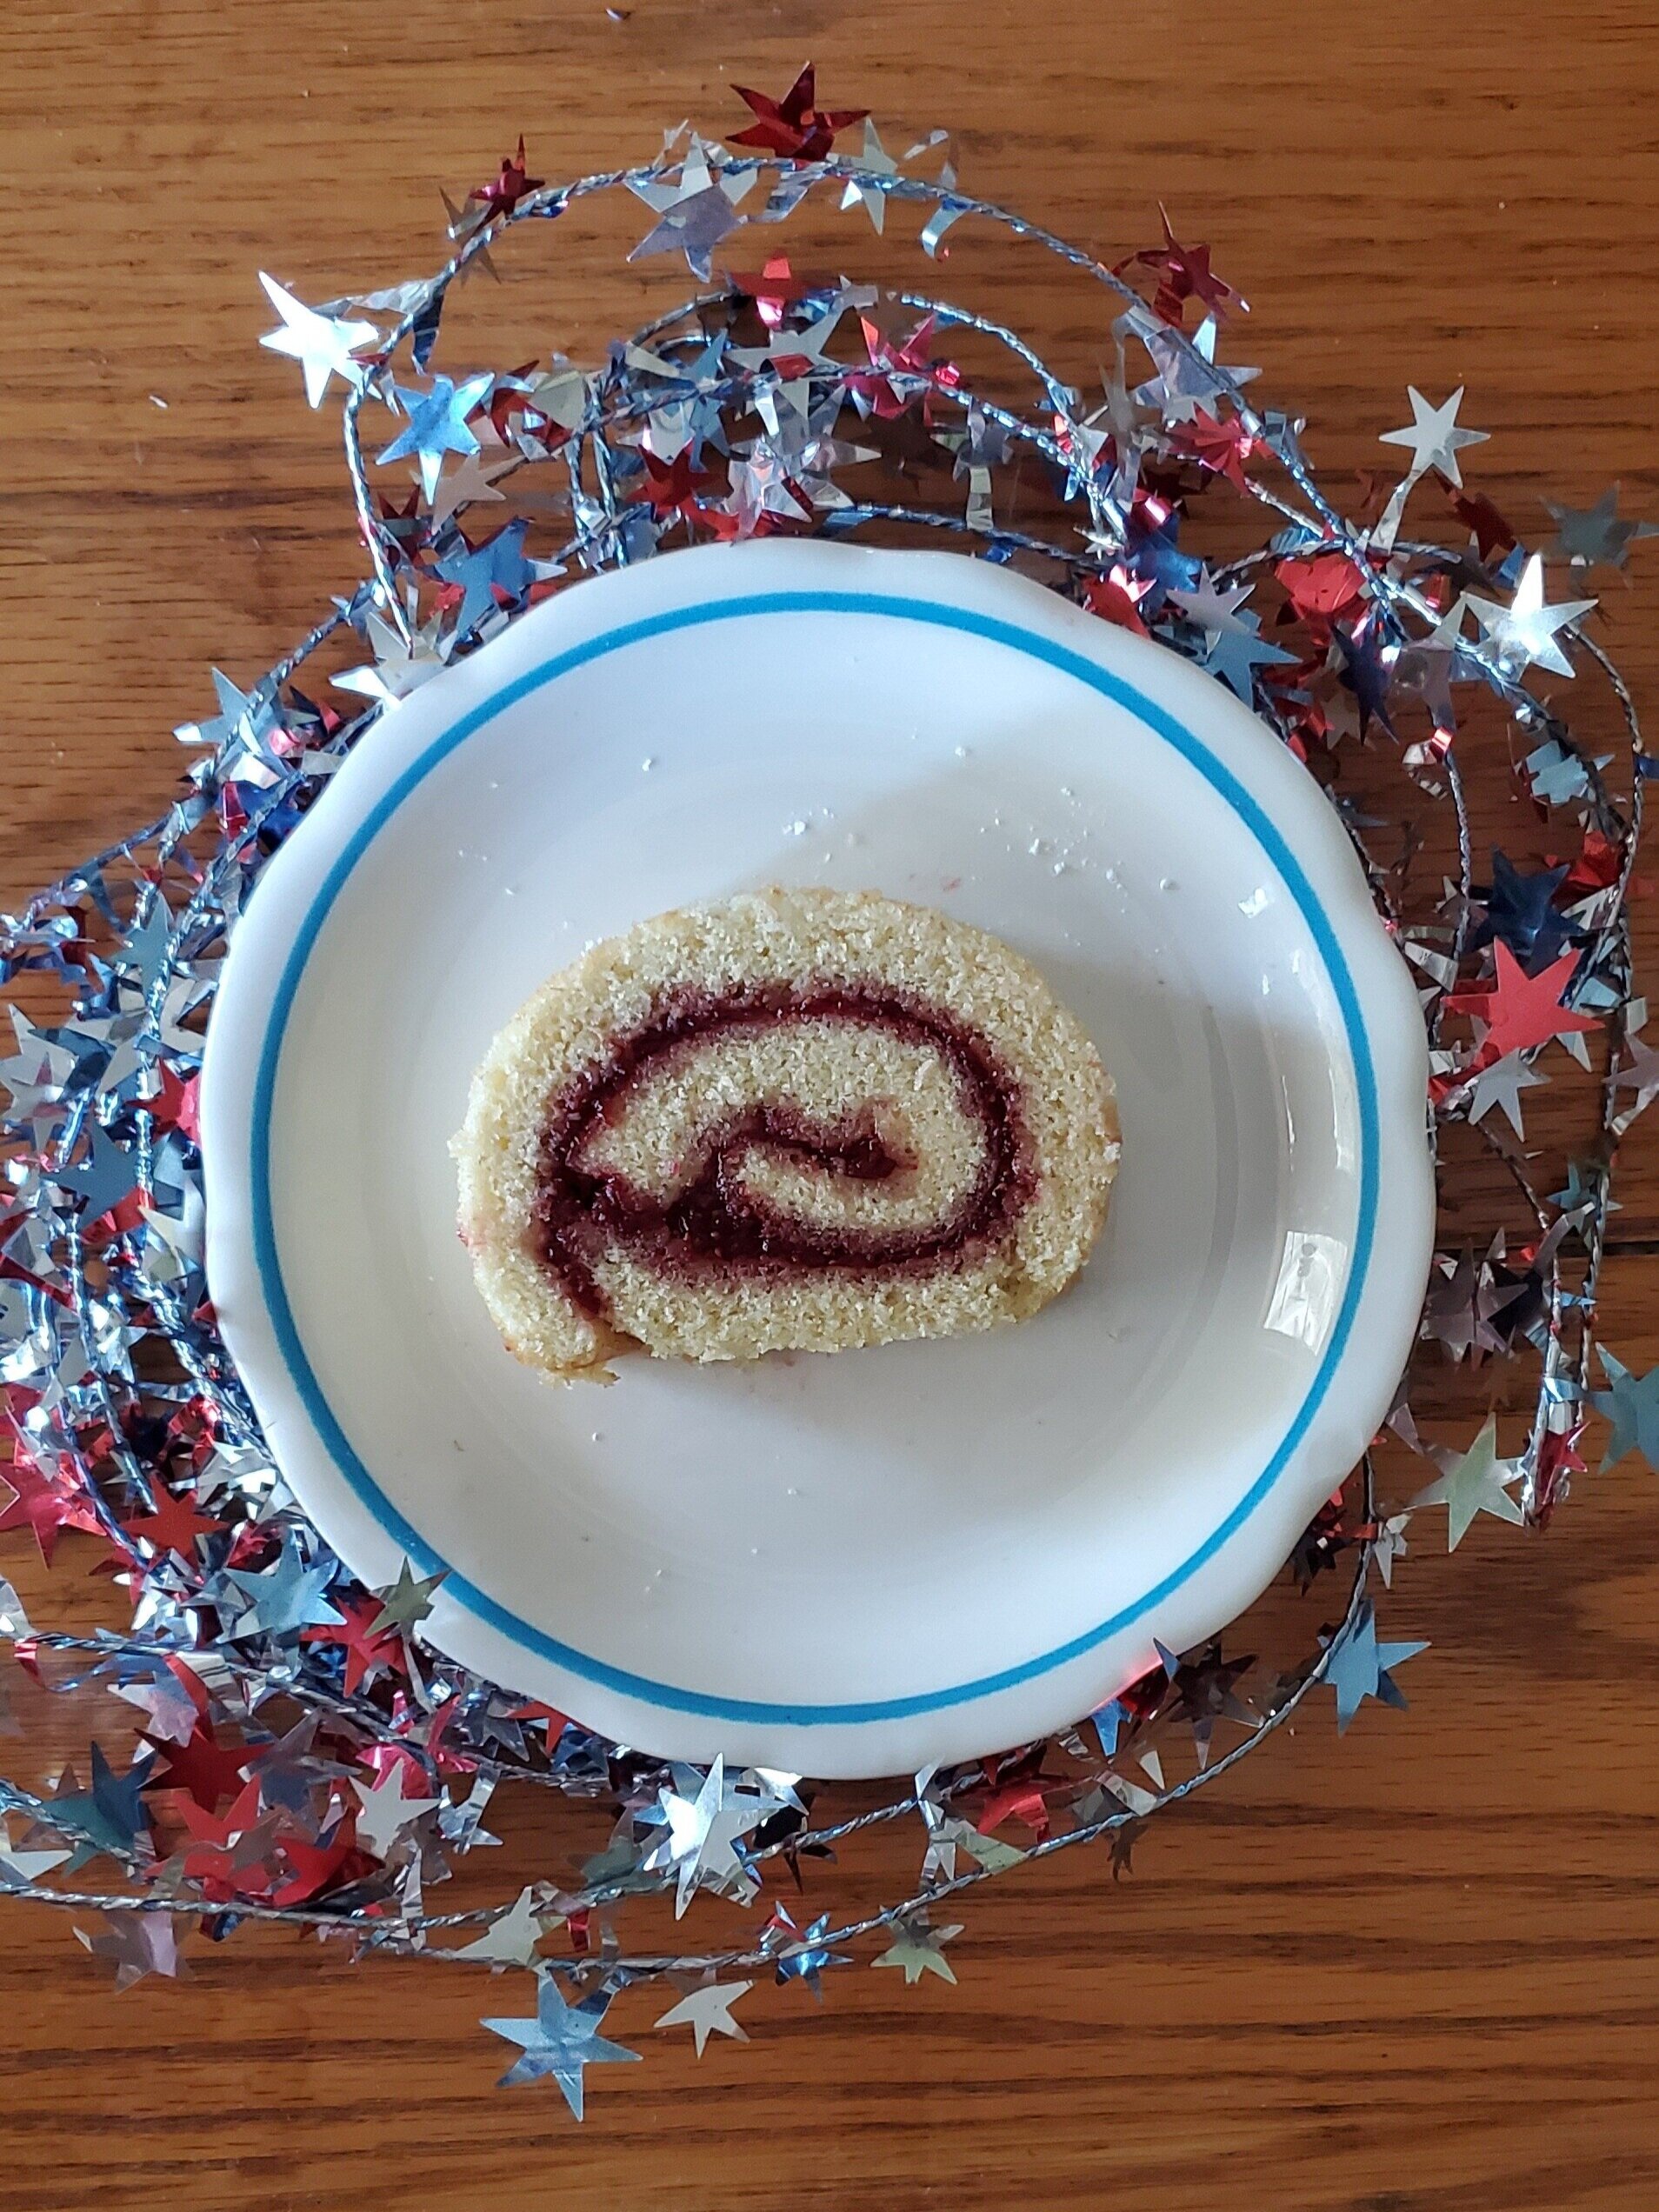 Old-Fashioned Jelly Roll Recipe